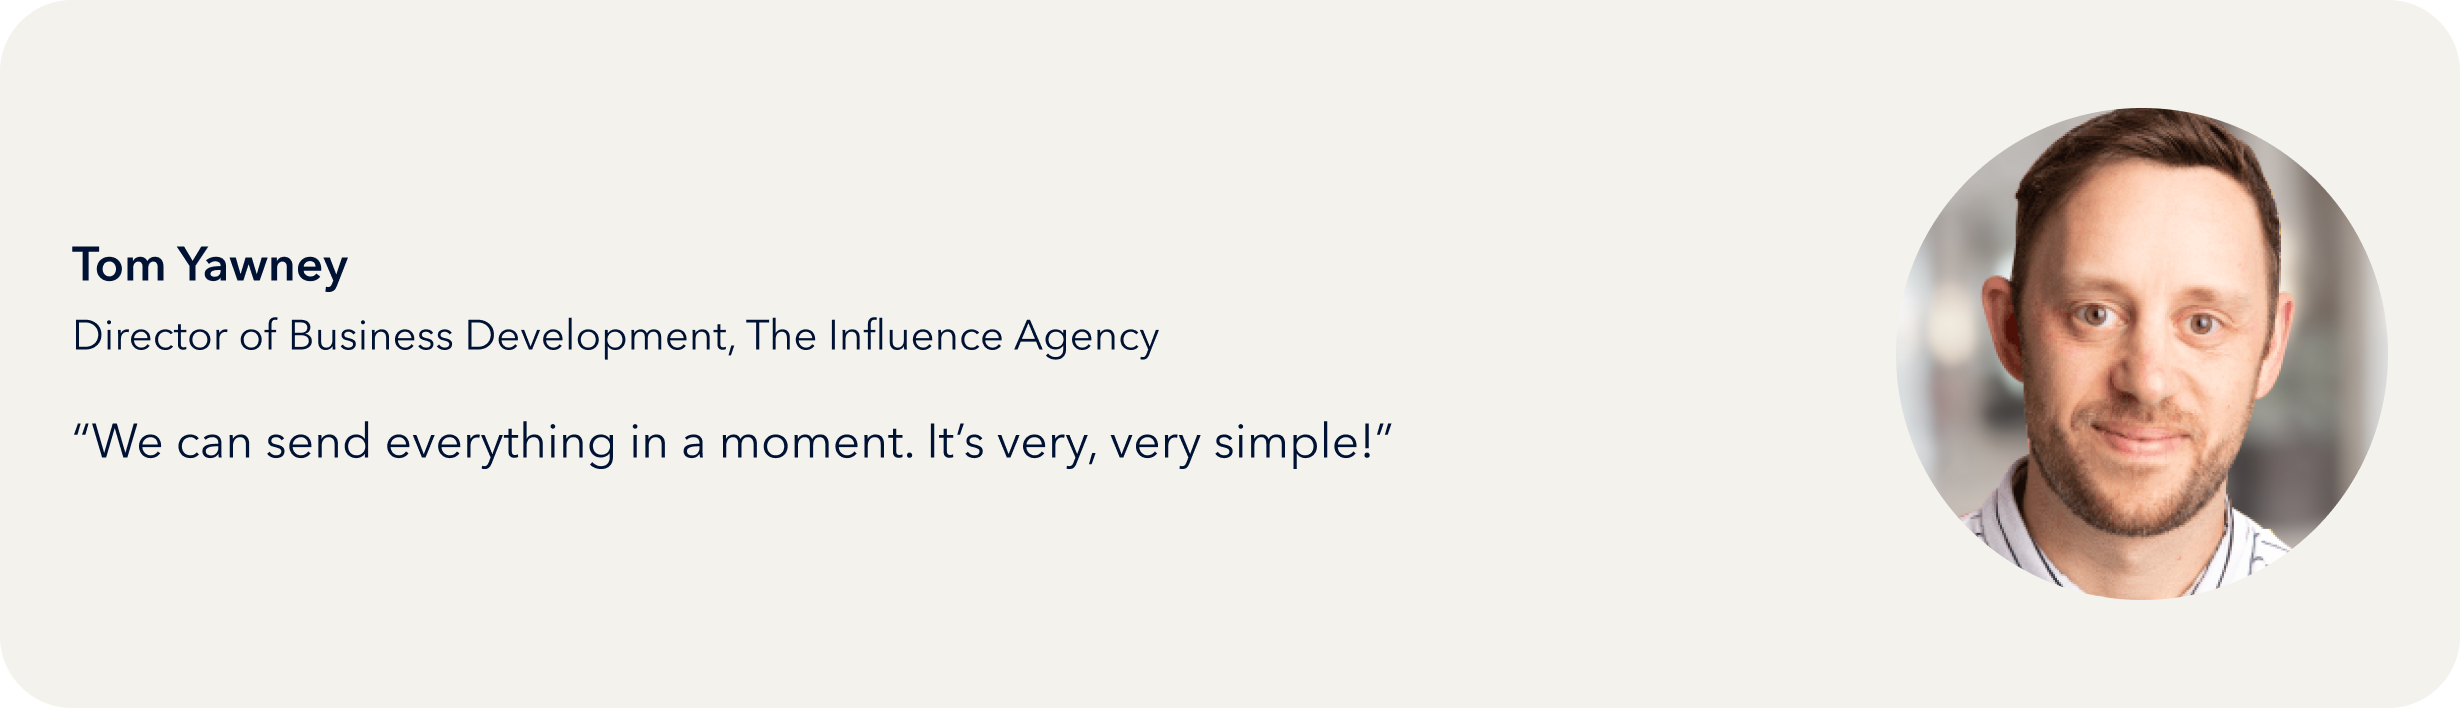 The Influence Agency pull quote